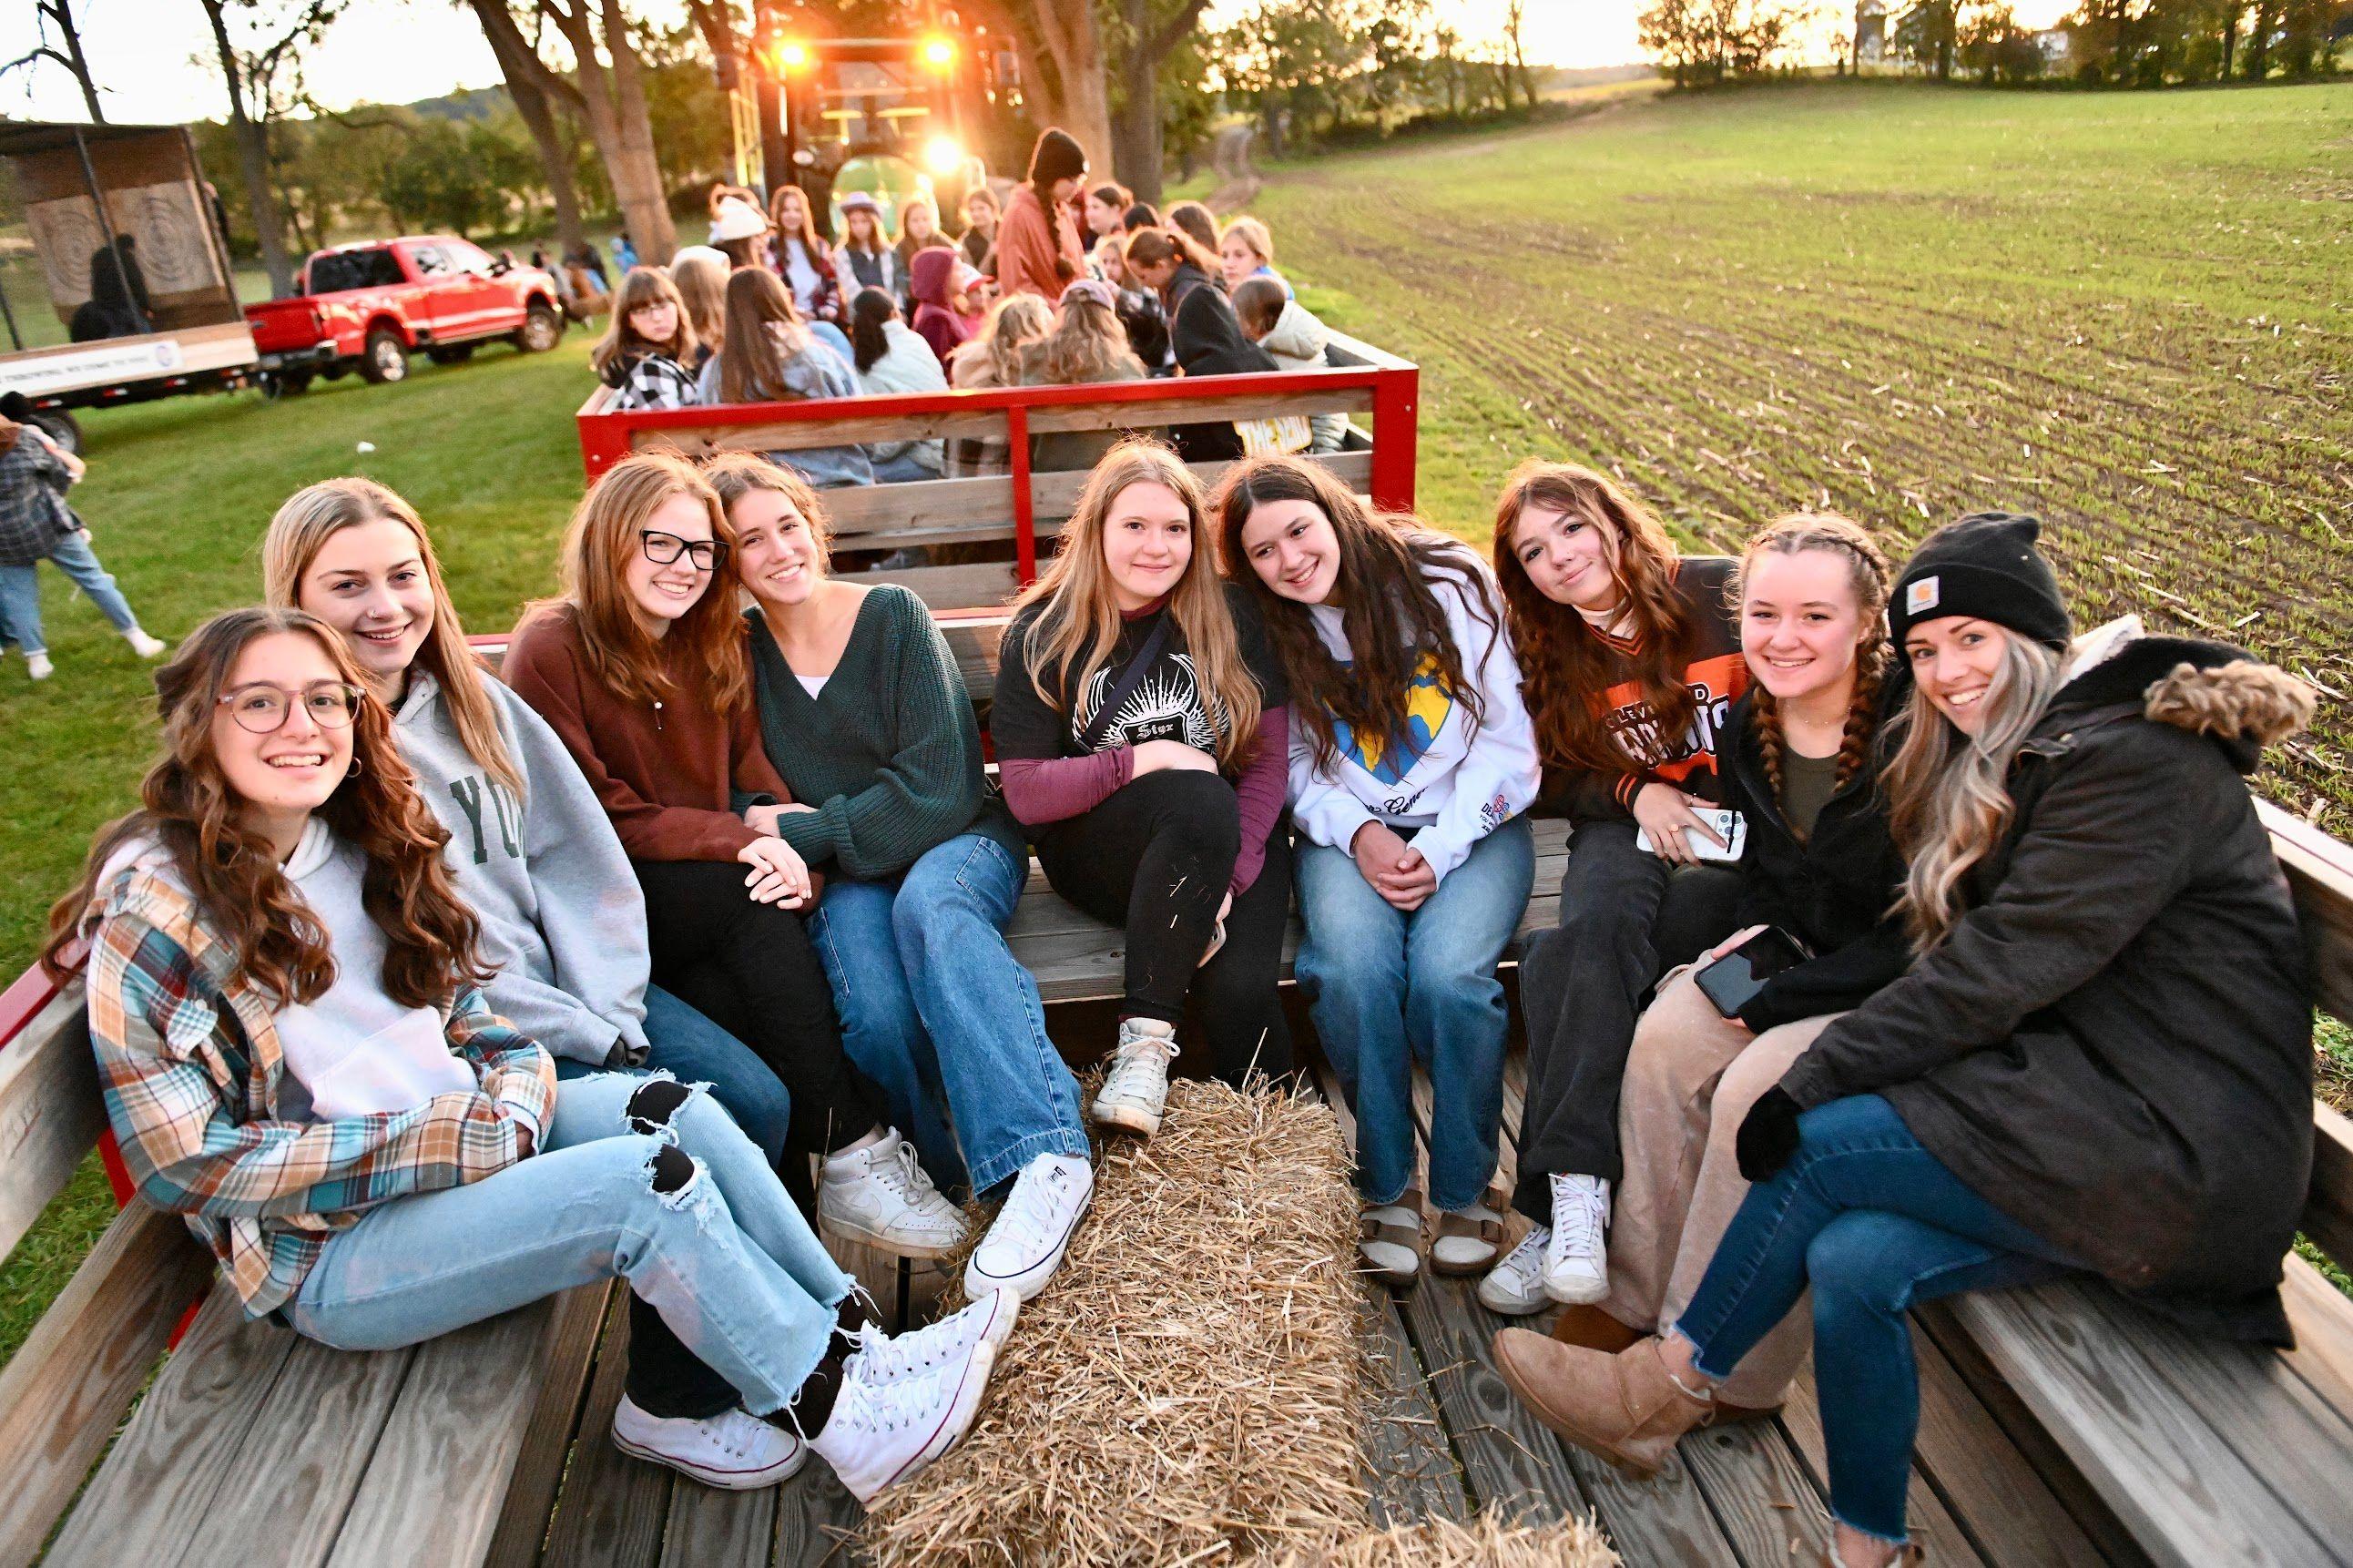 Friends on a wagon ride at harvest youth event.